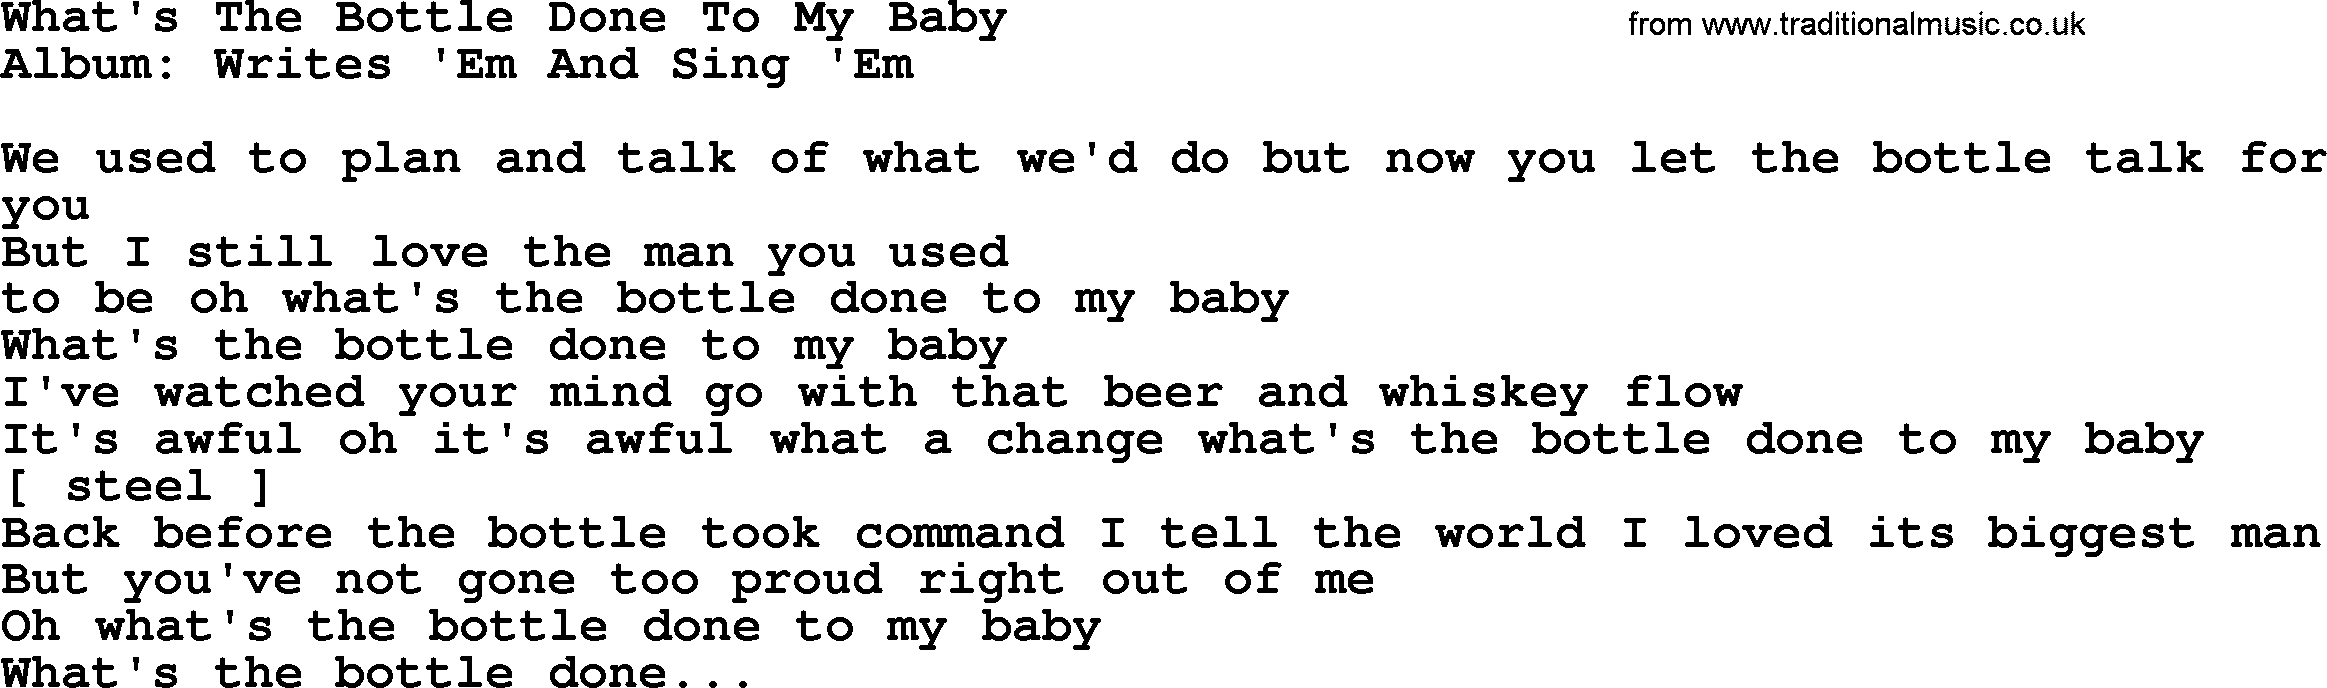 Loretta Lynn song: What's The Bottle Done To My Baby lyrics